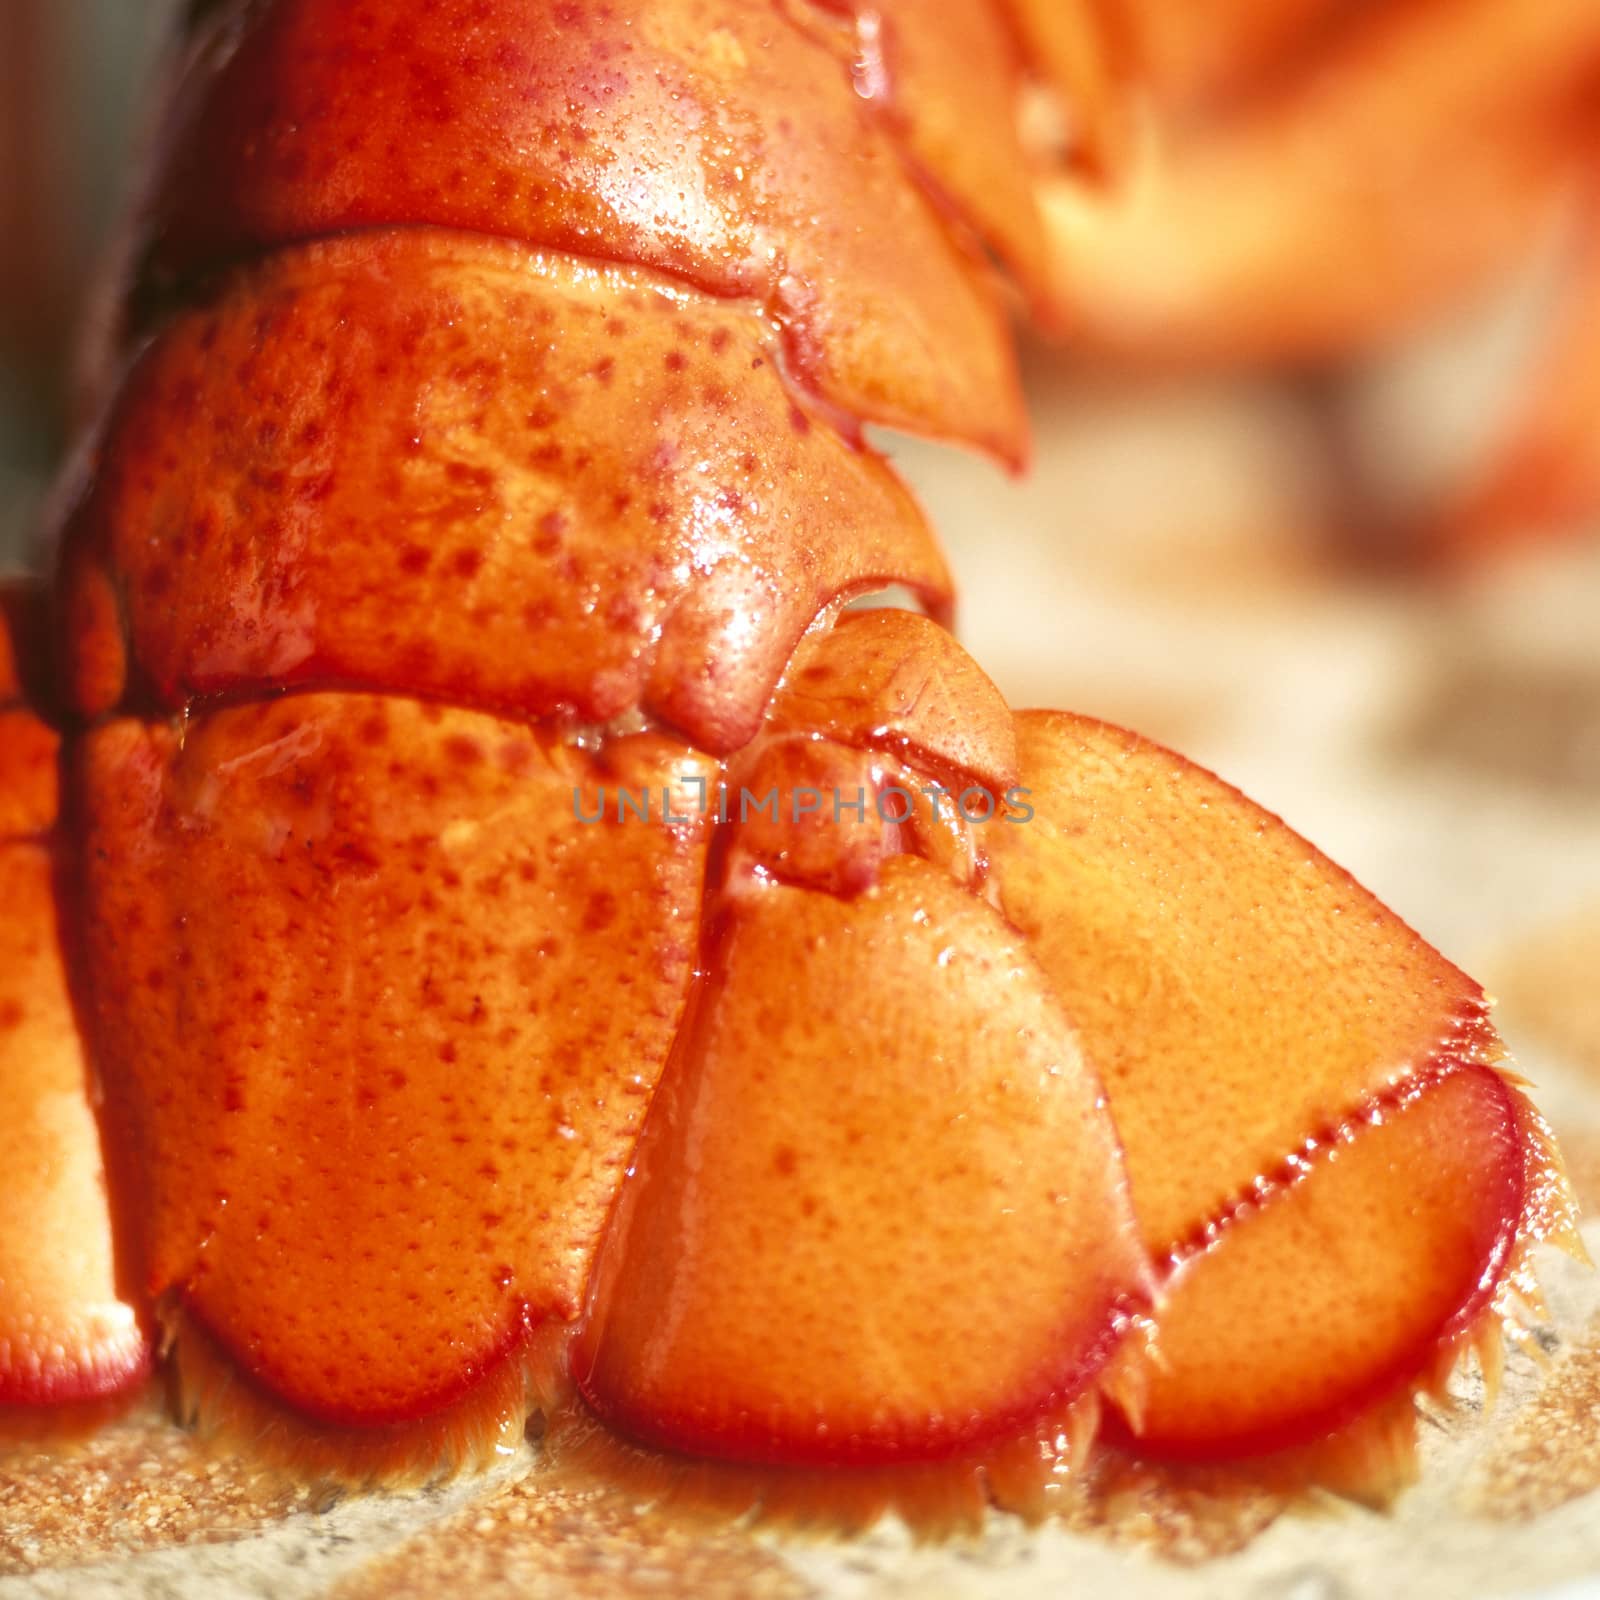 Fresh Lobster Tail by Whiteboxmedia